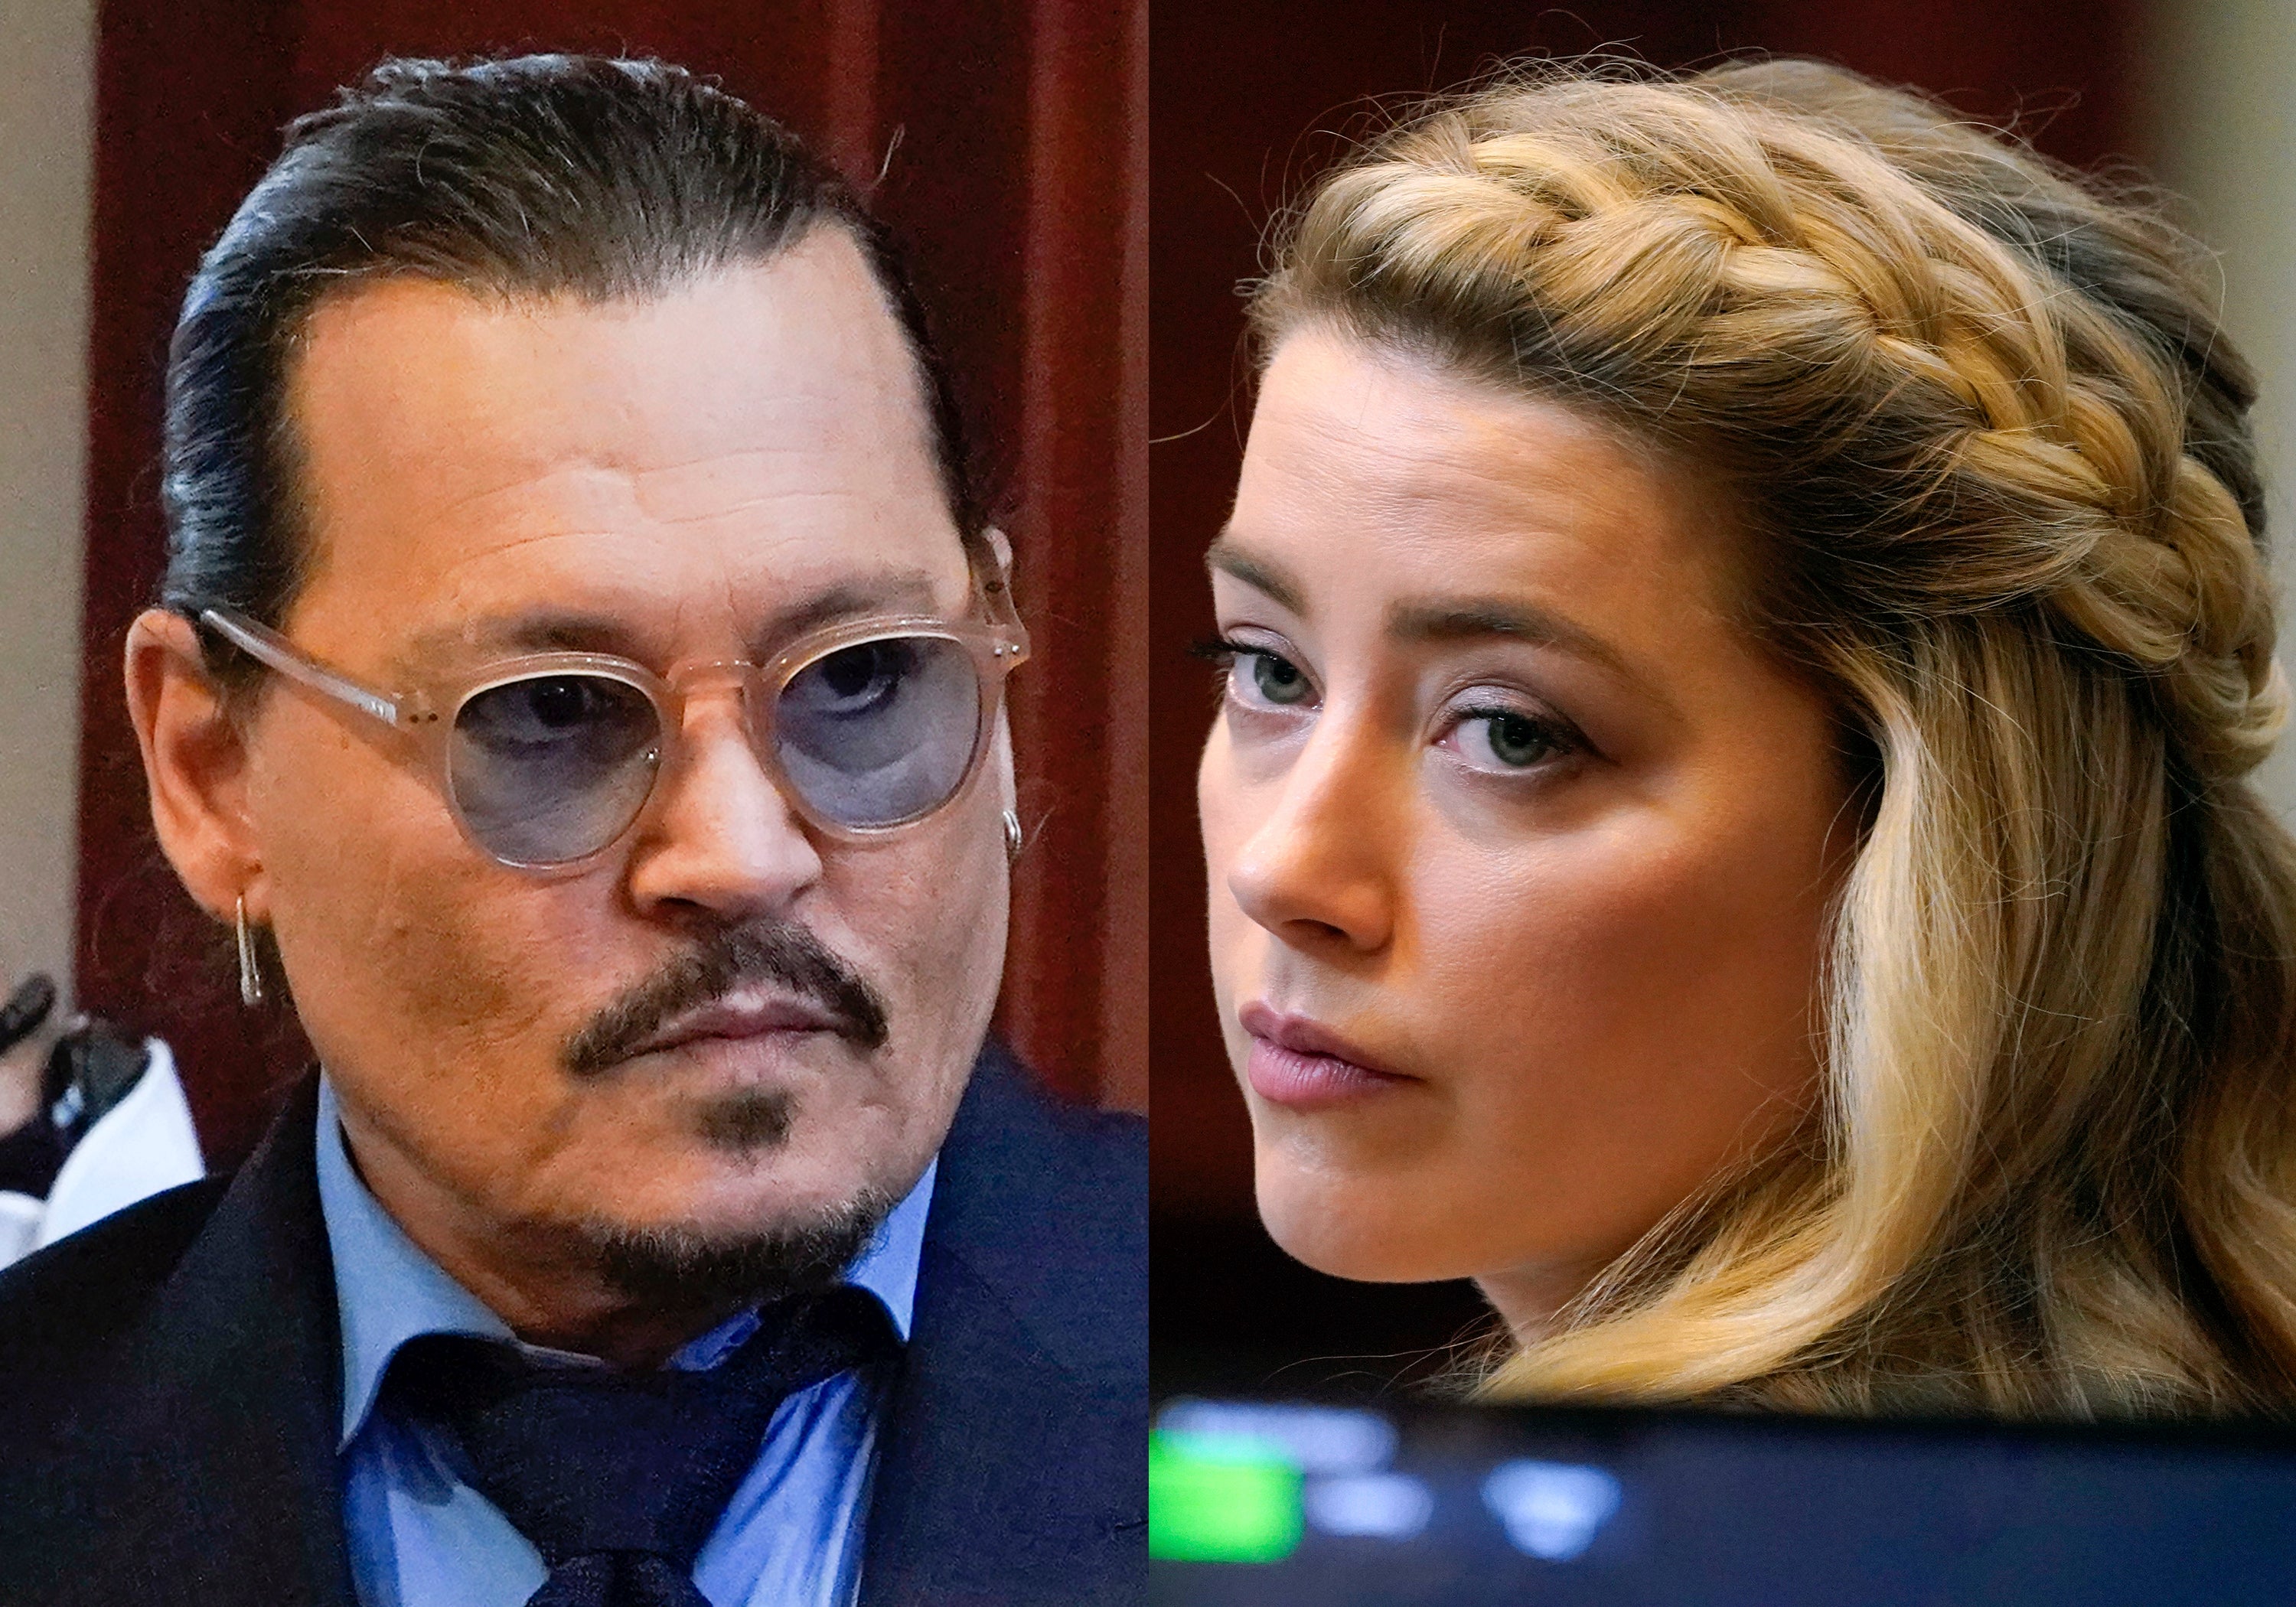 Johnny Depp and Amber Heard in two separate photos in court on 27 May where jurors were finally given the case